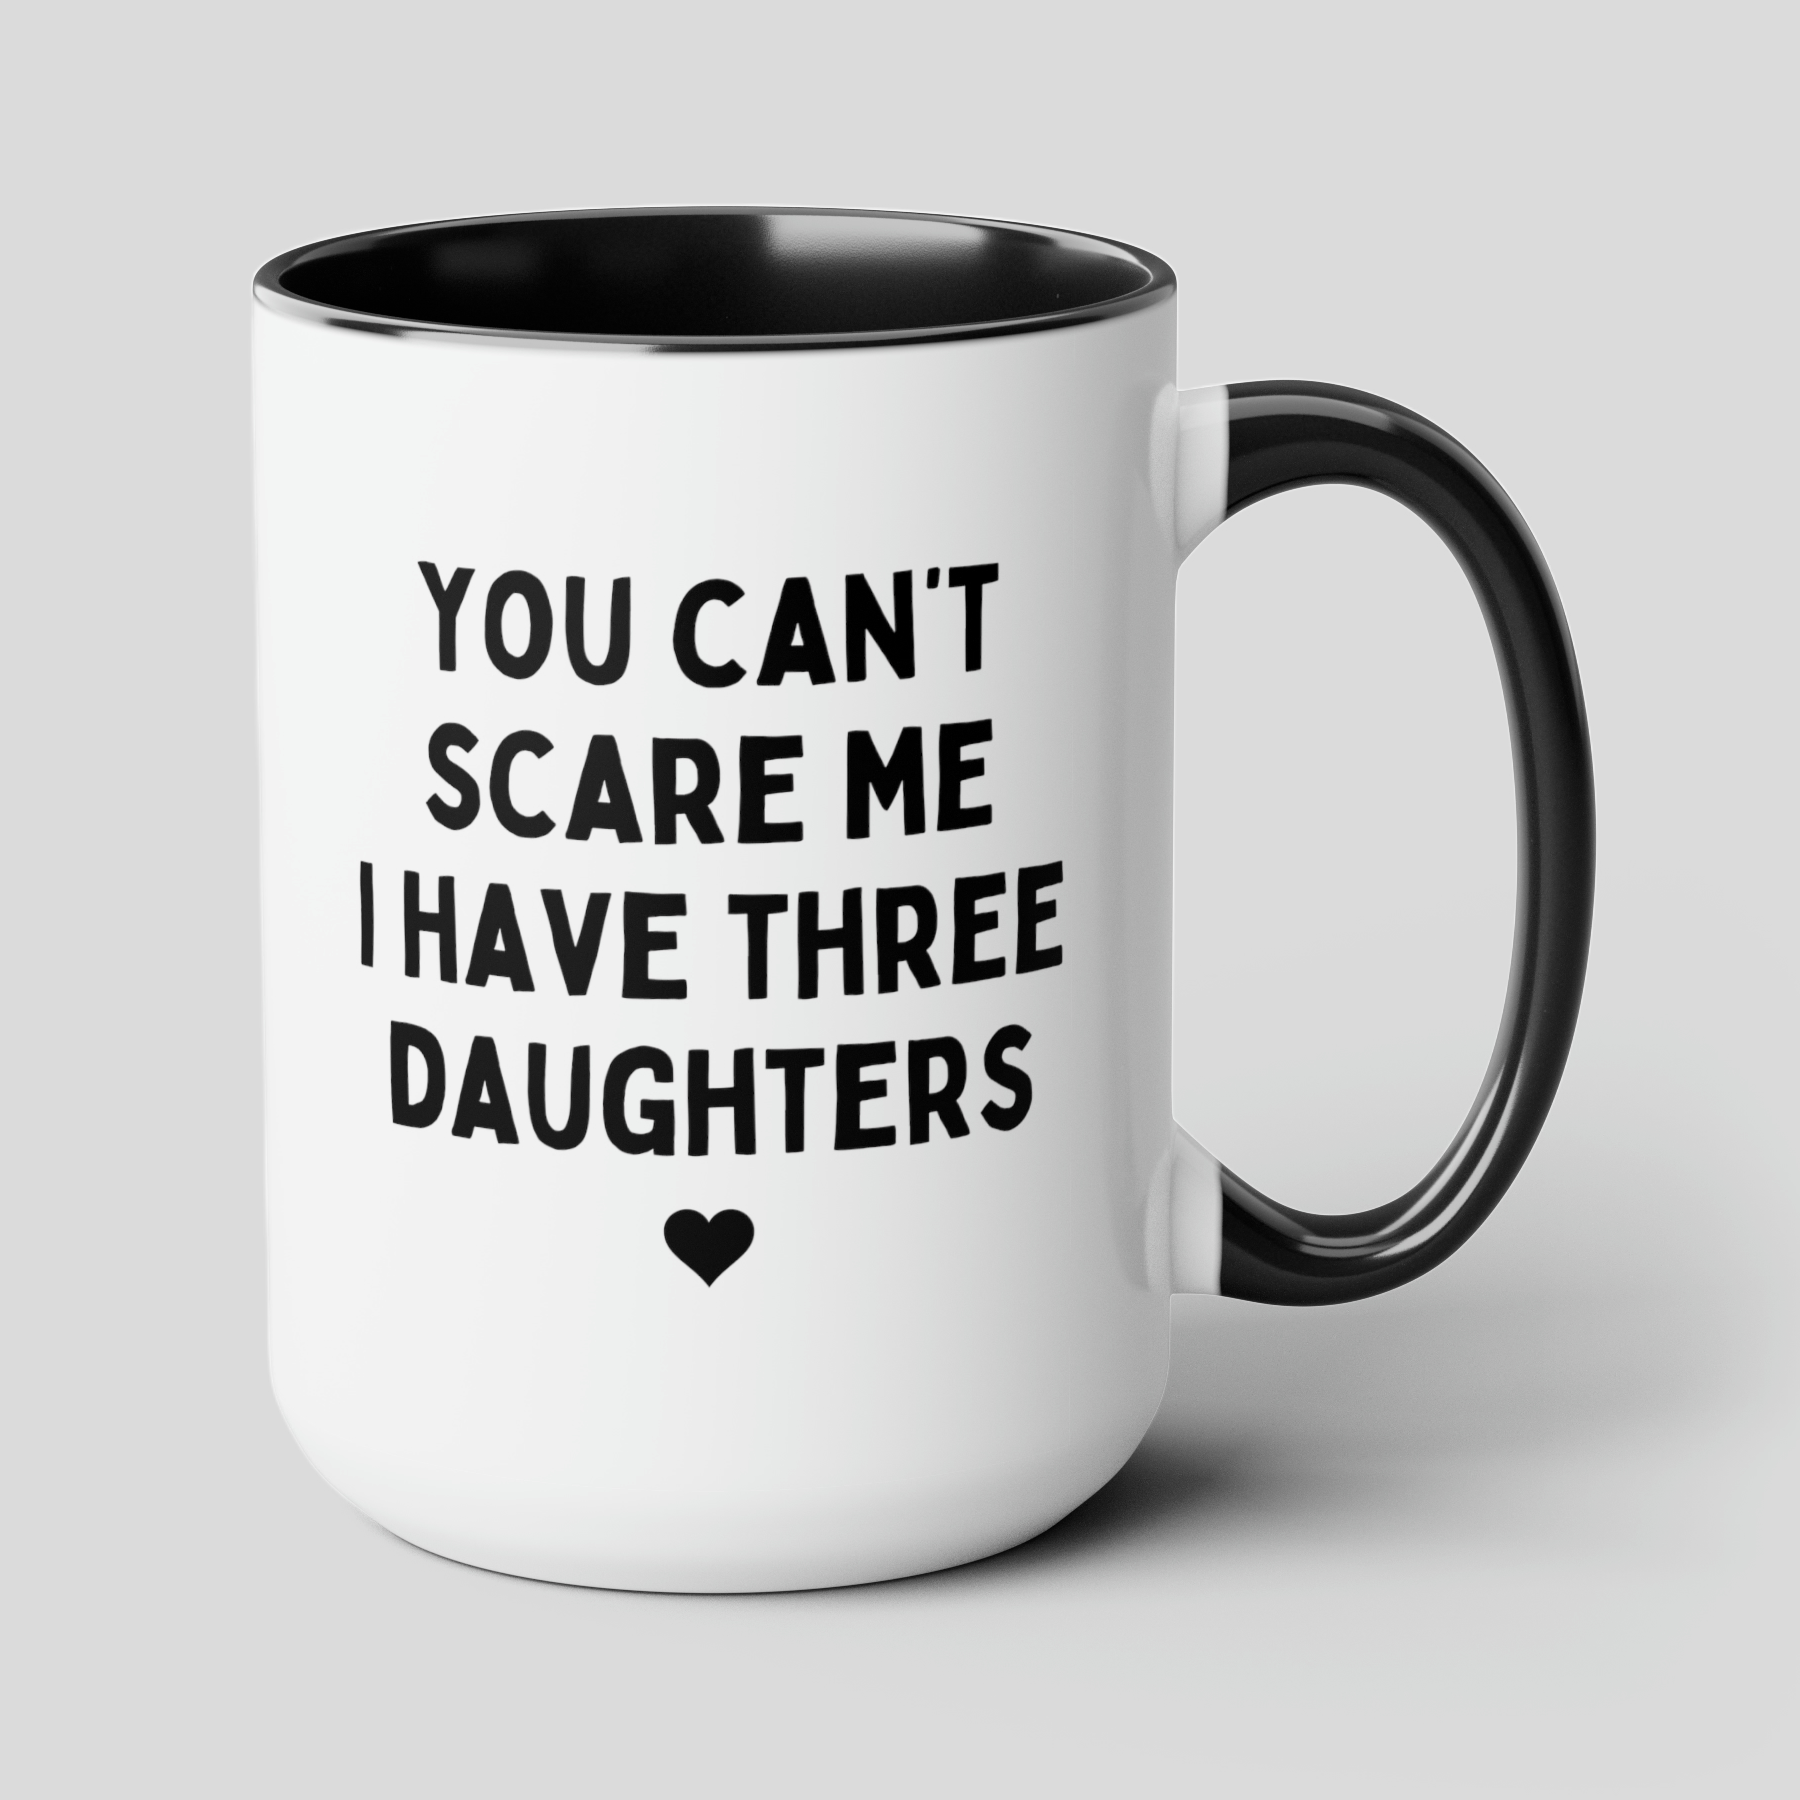 You Can't Scare Me I have Three Daughters 15oz white with black accent funny large coffee mug gift for fathers day dad husband grandpa tea cup waveywares wavey wares wavywares wavy wares cover